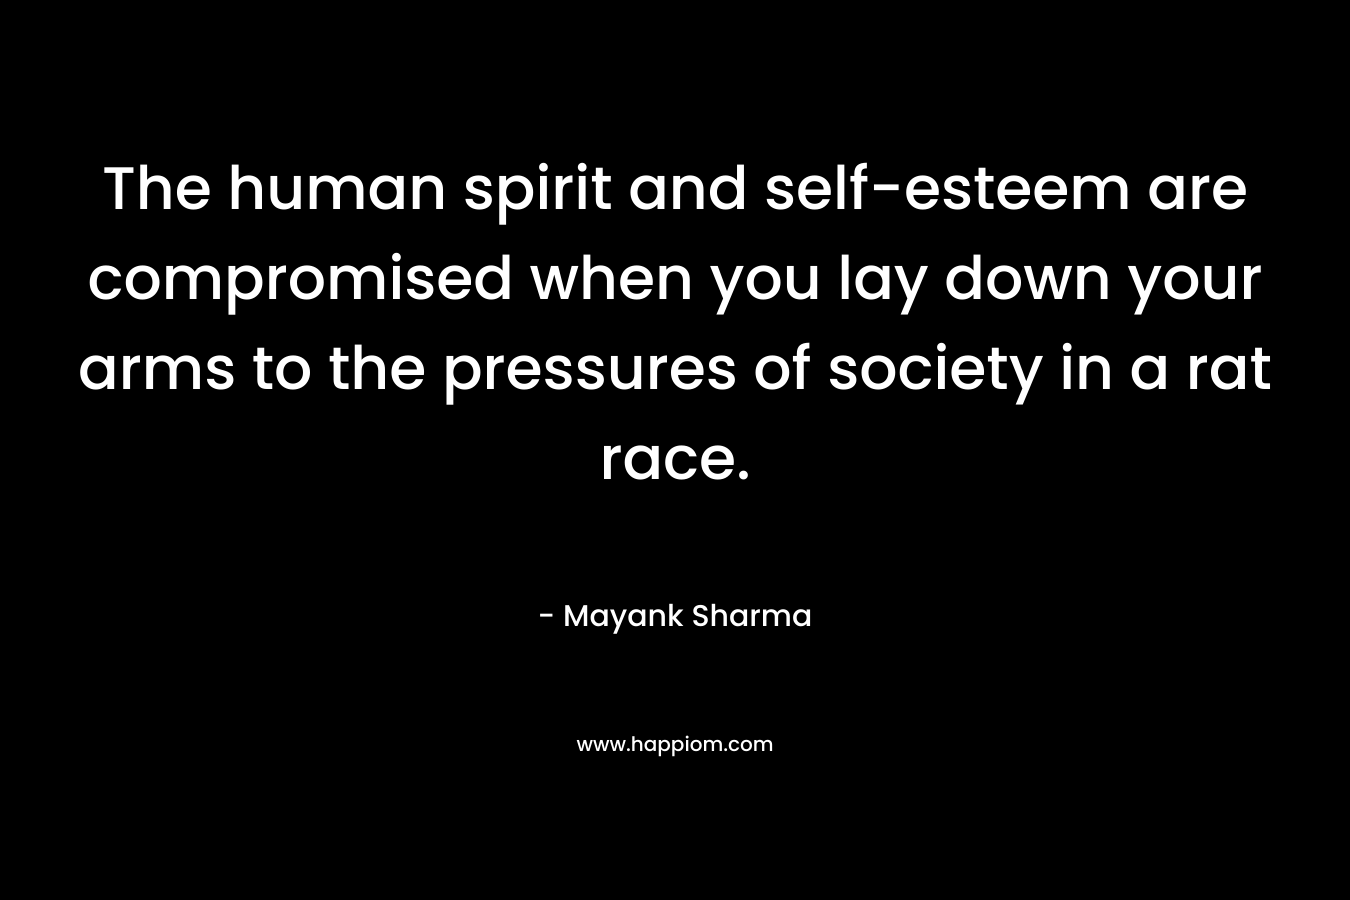 The human spirit and self-esteem are compromised when you lay down your arms to the pressures of society in a rat race.